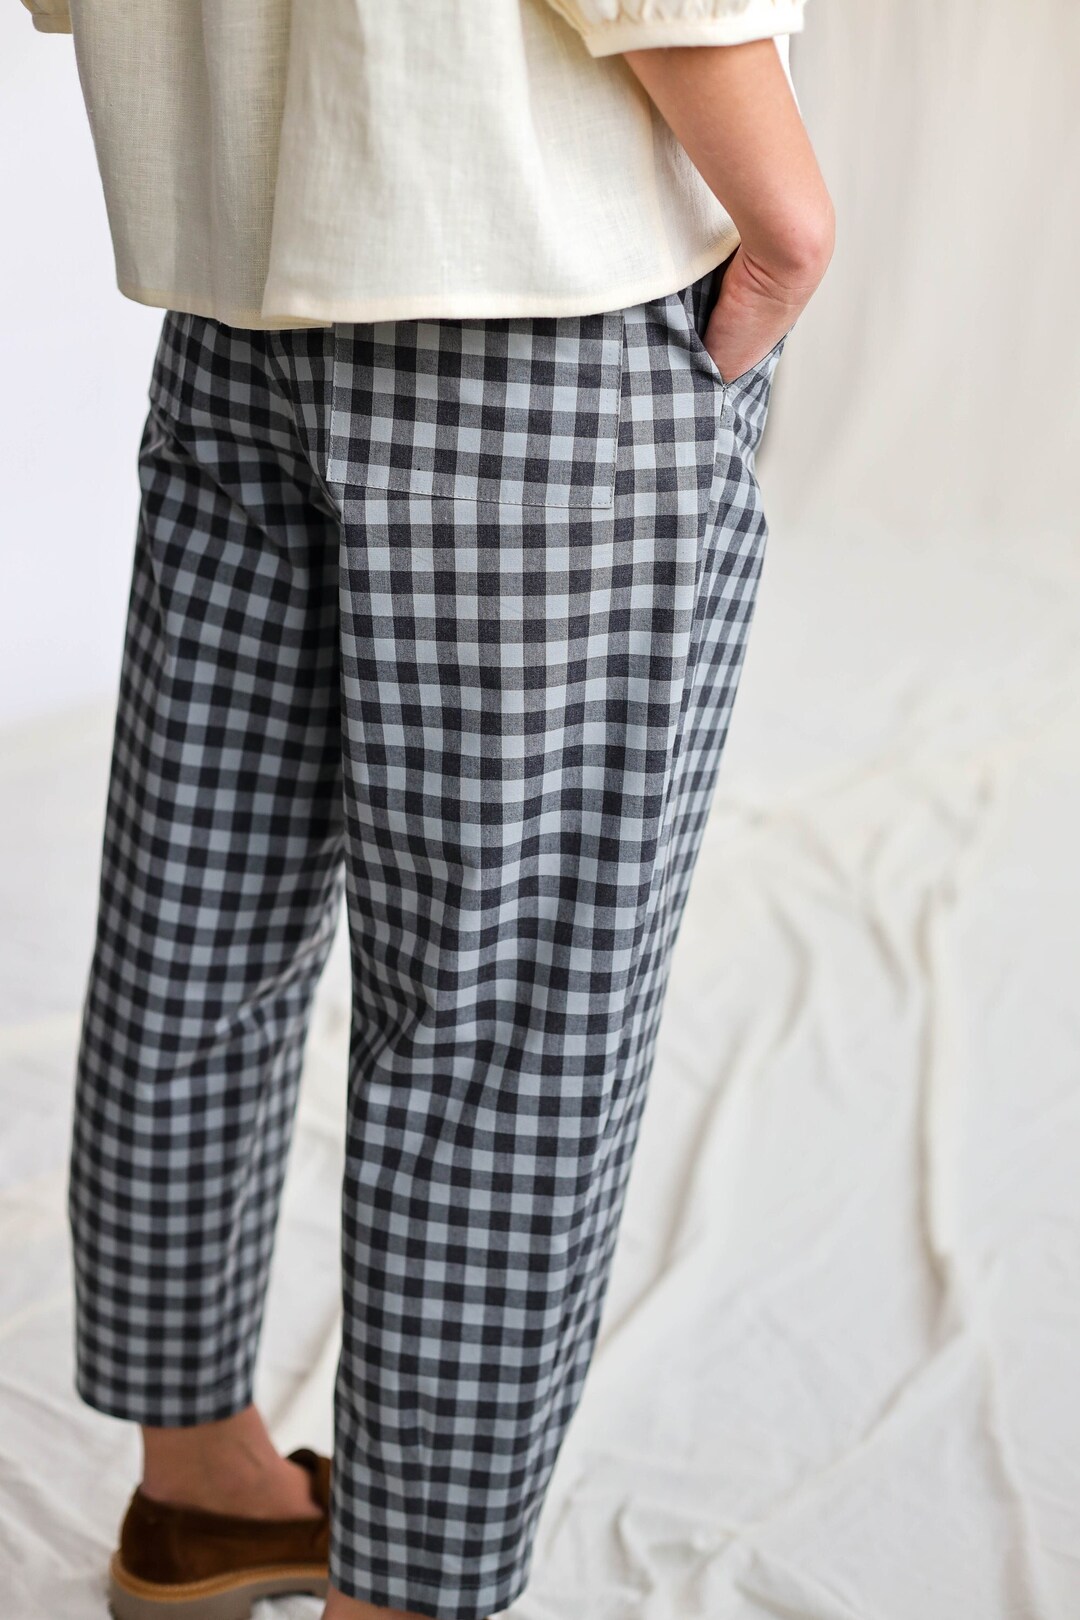 Boxy Gingham Trousers OFFON CLOTHING - Etsy